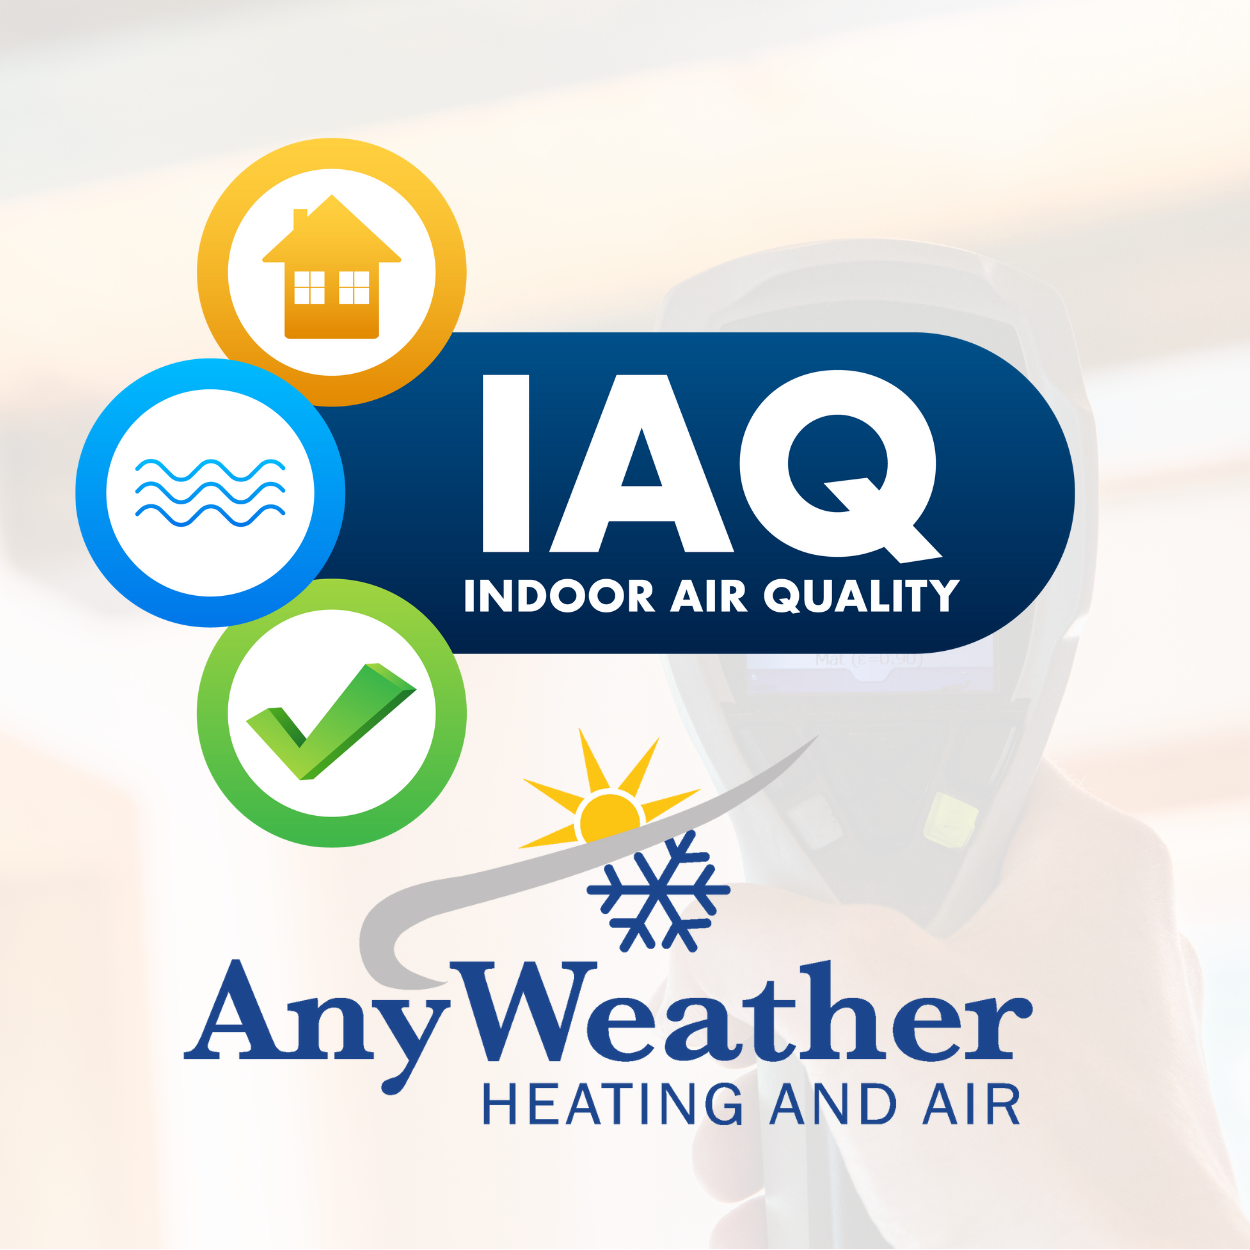 Indoor Air Quality Services in Cold Spring, KY and Cincinnati